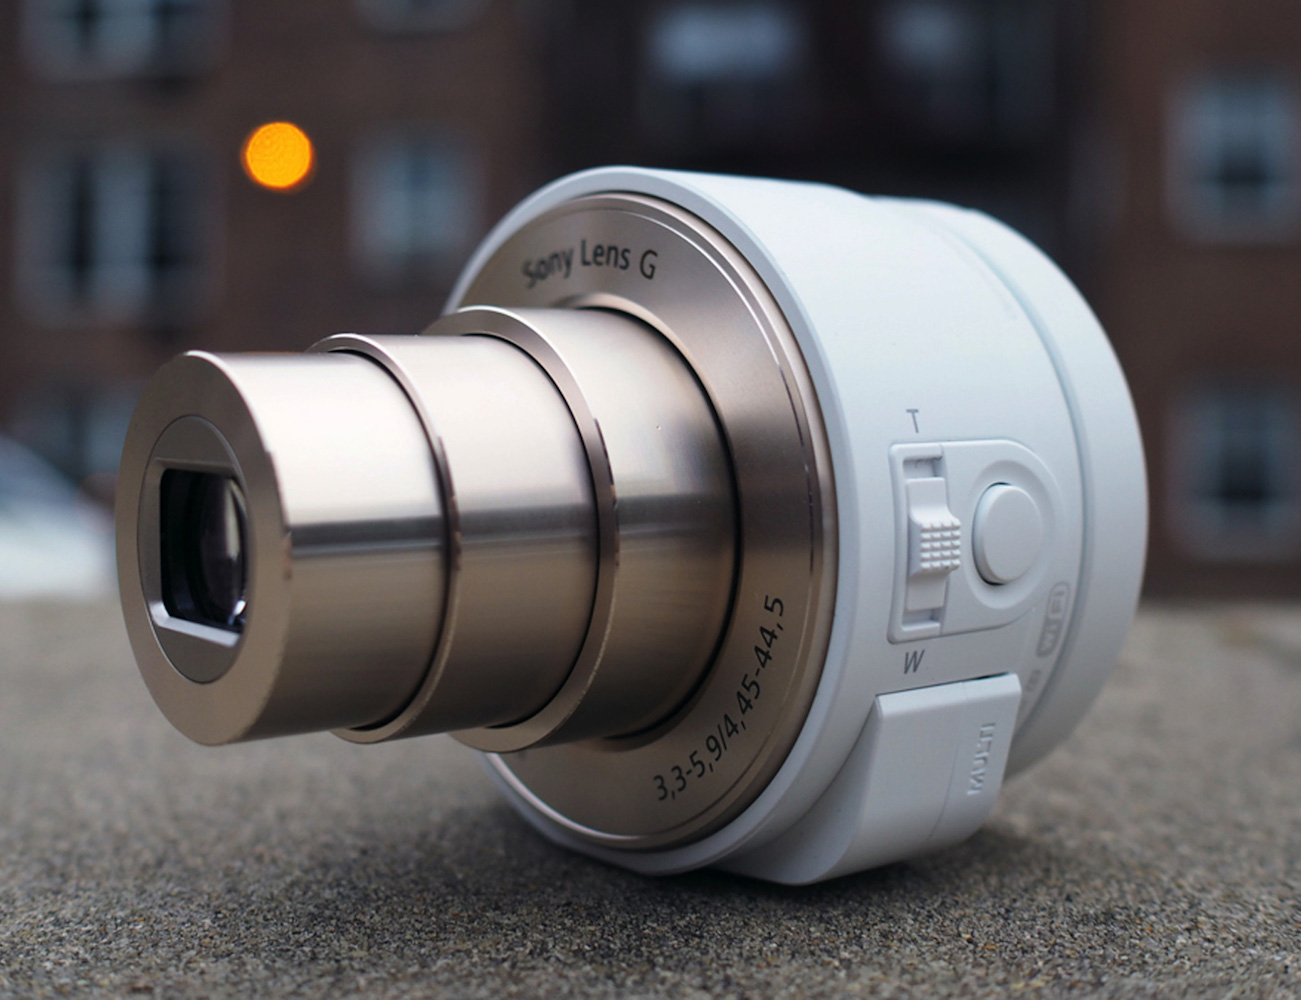 Sony Attachable Zoom Lens For Smartphones Review » The